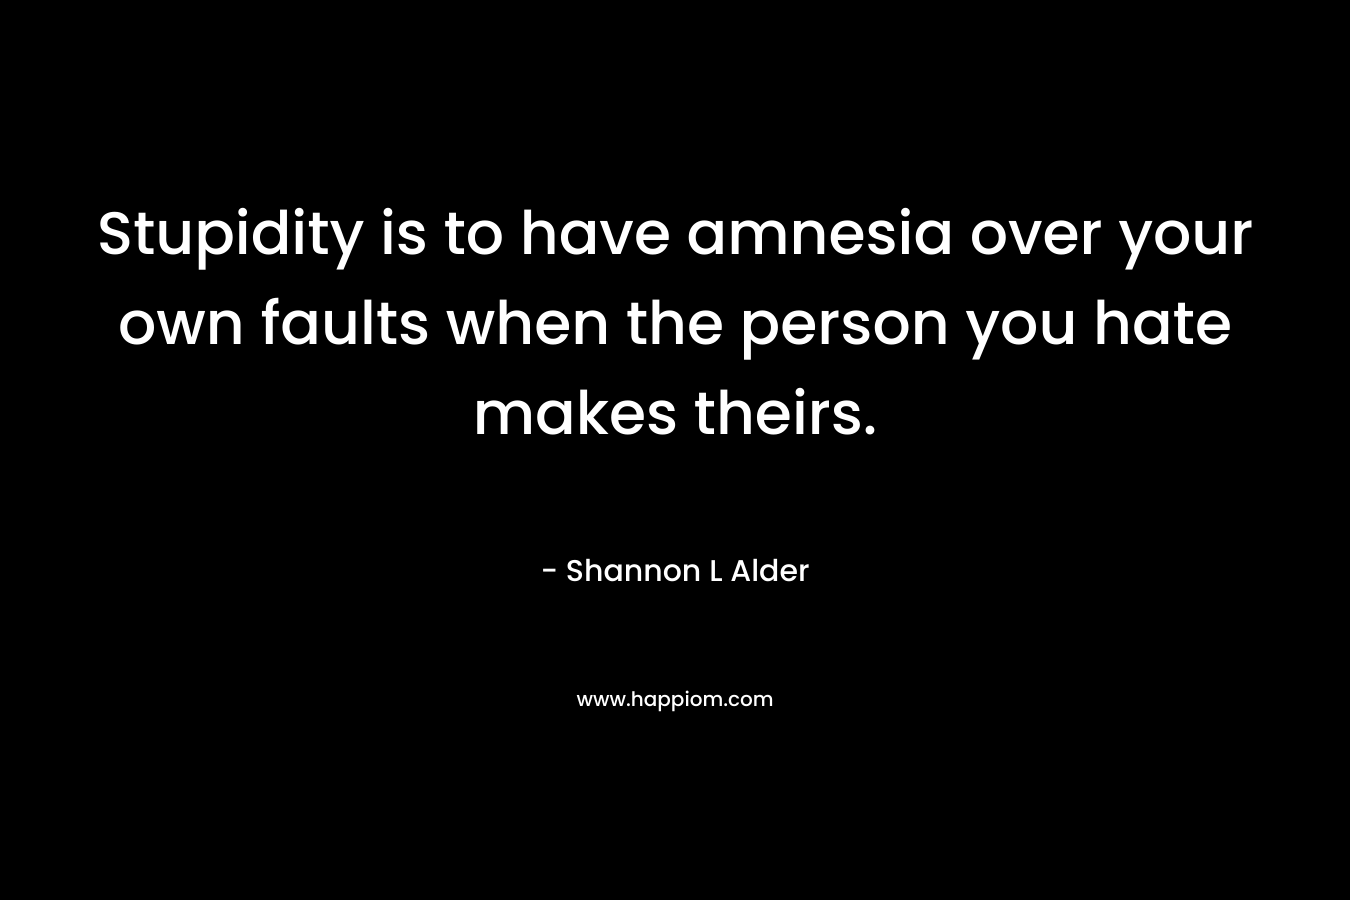 Stupidity is to have amnesia over your own faults when the person you hate makes theirs. – Shannon L Alder